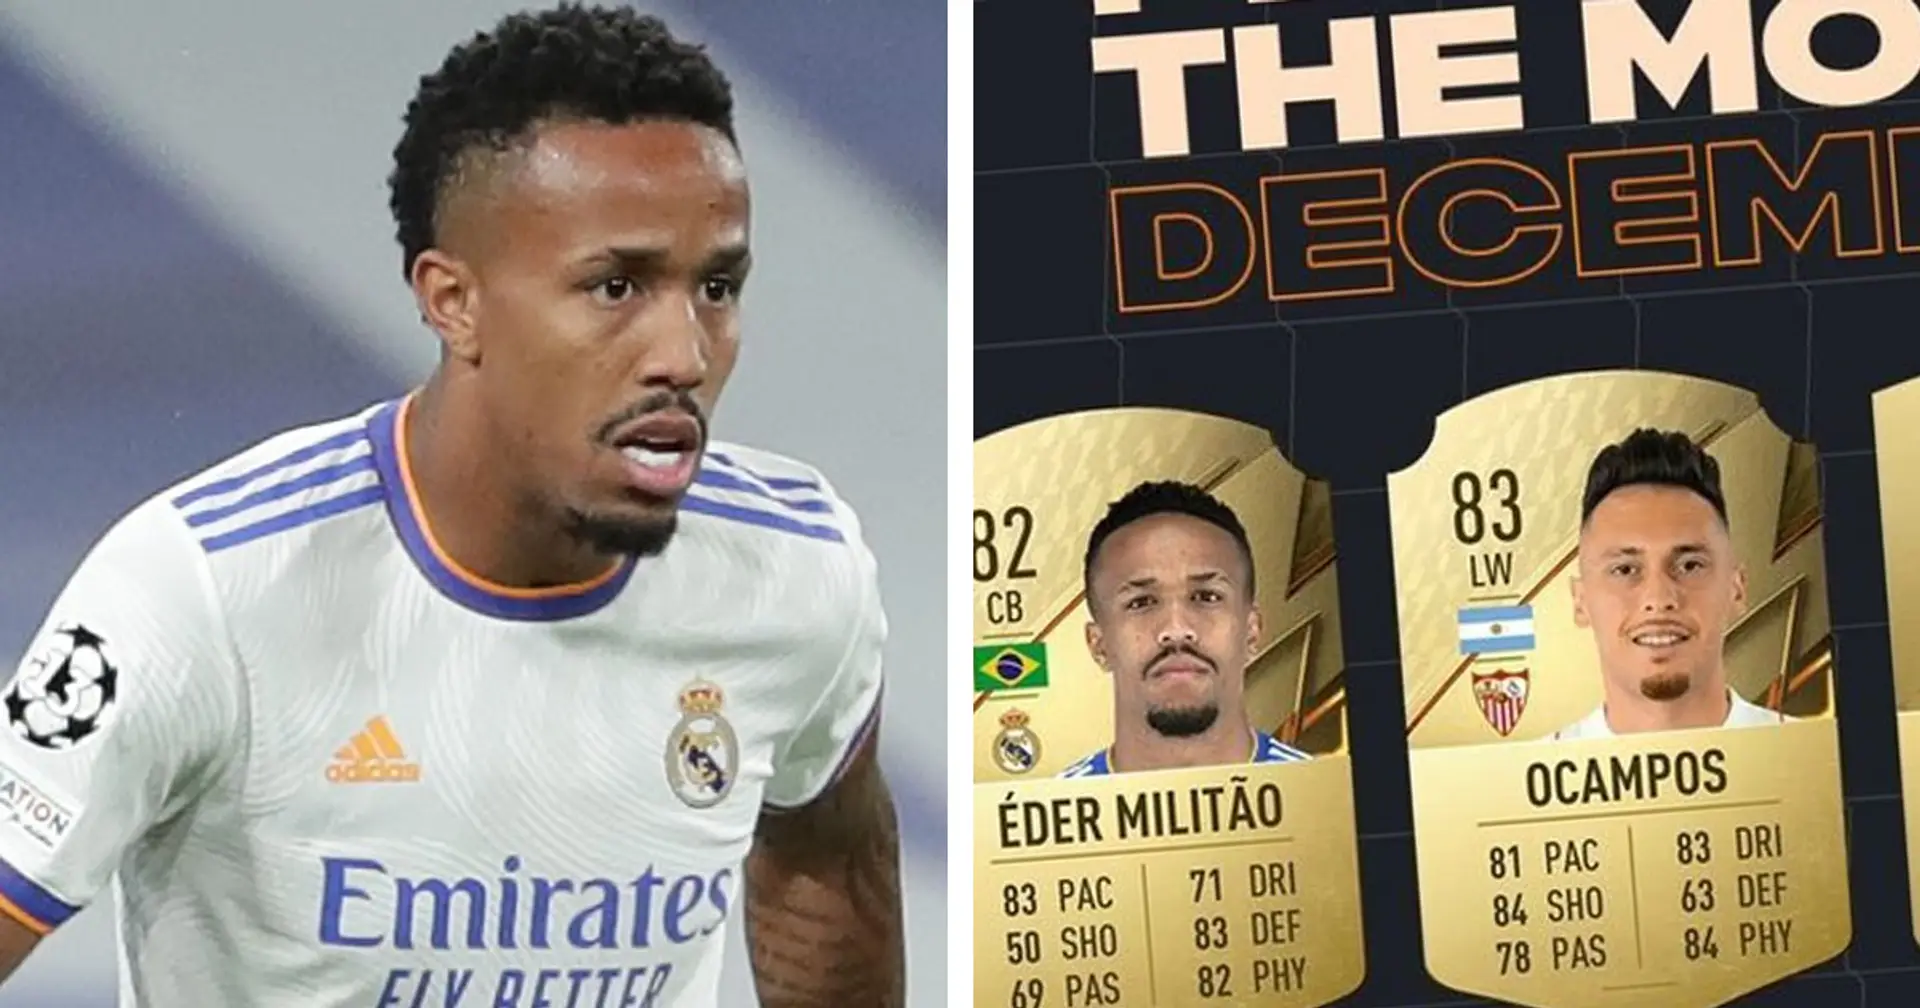 Militao nominated for La Liga Player of the Month award, Benzema snubbed again